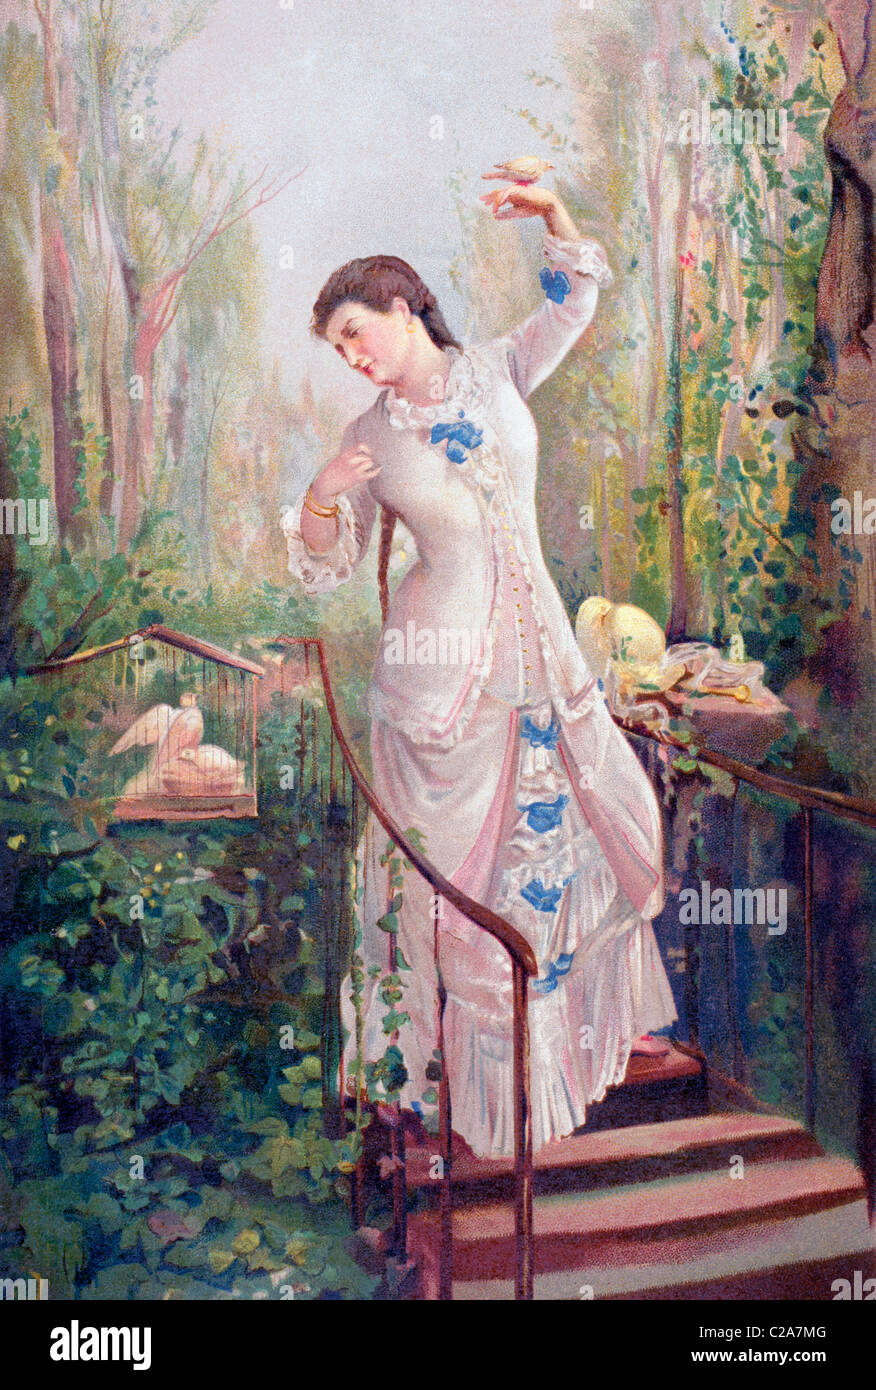 A 19th century woman in a garden with turtledoves. After the painting La Tórtola Madre, by Ramon Marti y Alsina. Stock Photo